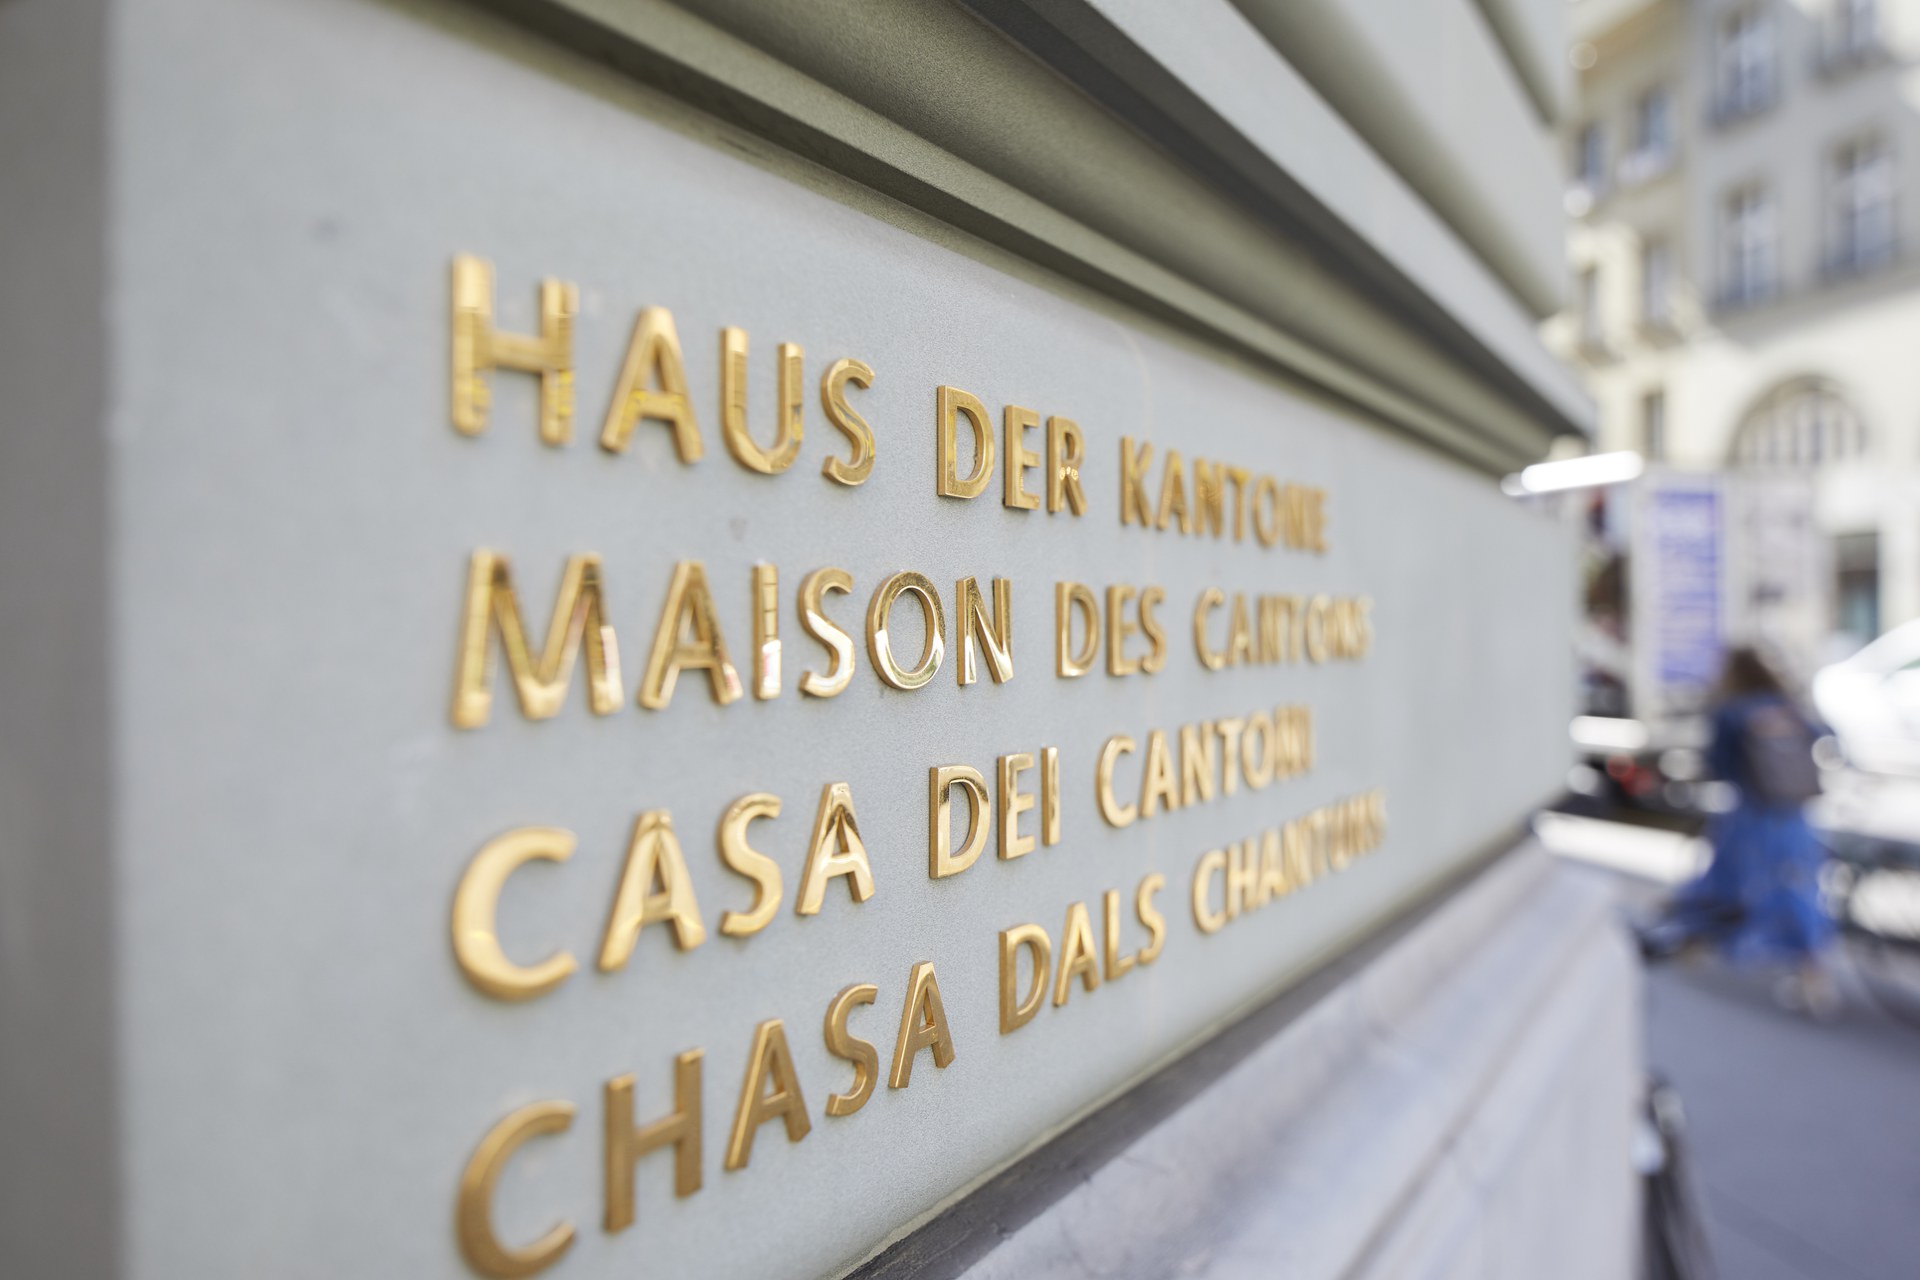 Building entrance with the 'Haus der Kantone' sign in all national languages